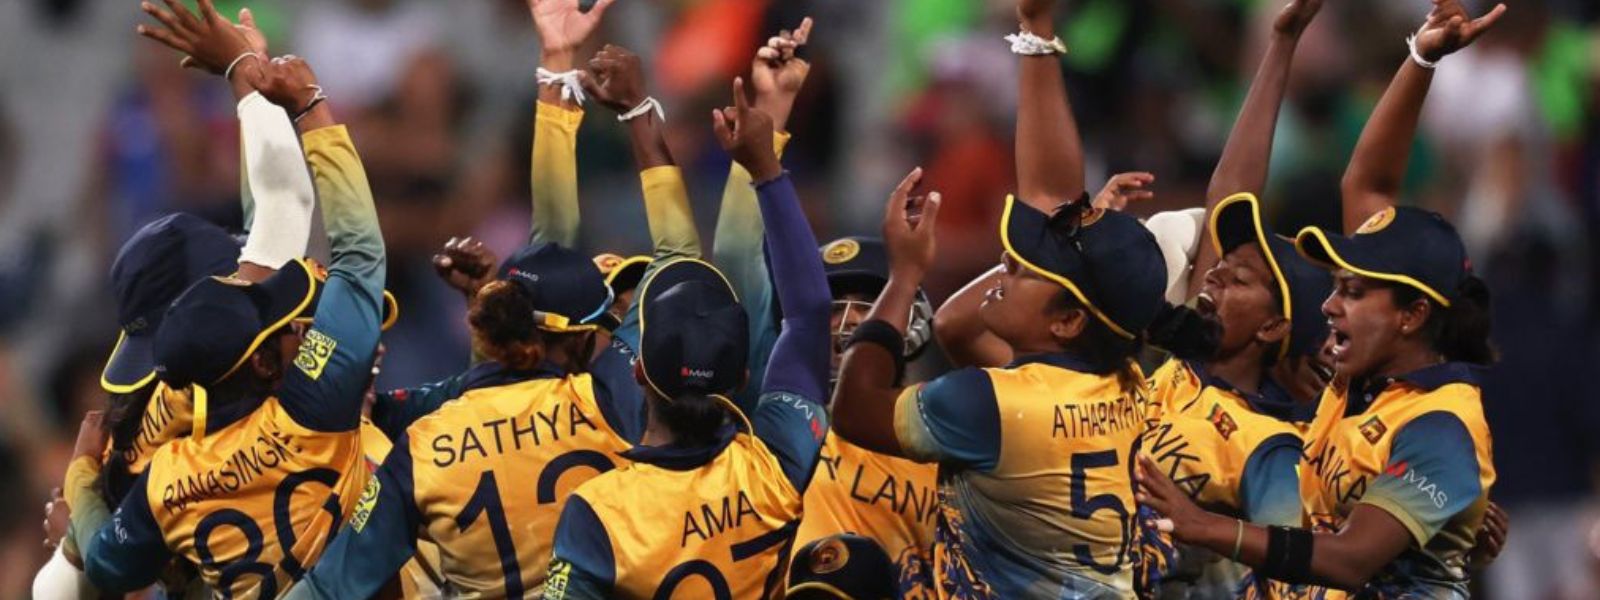 SL defeat SA in opening match of Women's T20 WC